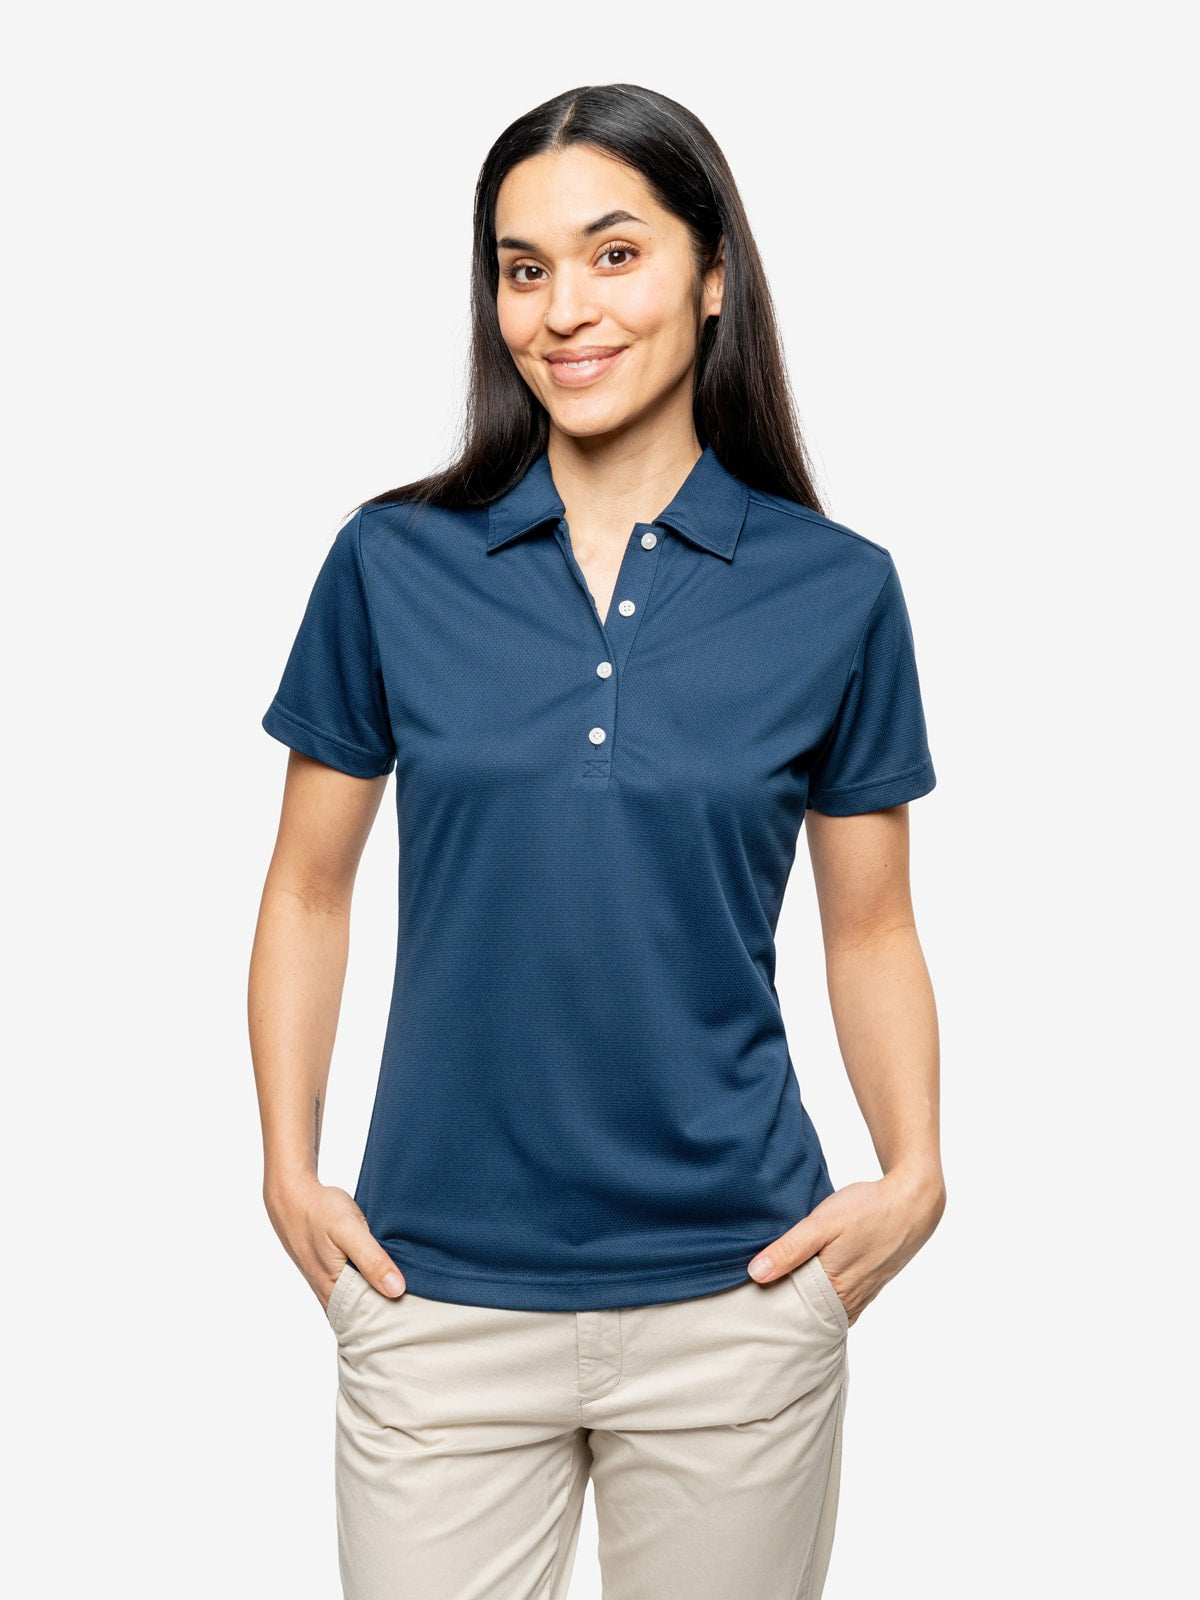 Insect Shield Women's Airflow Short Sleeve Polo Shirt